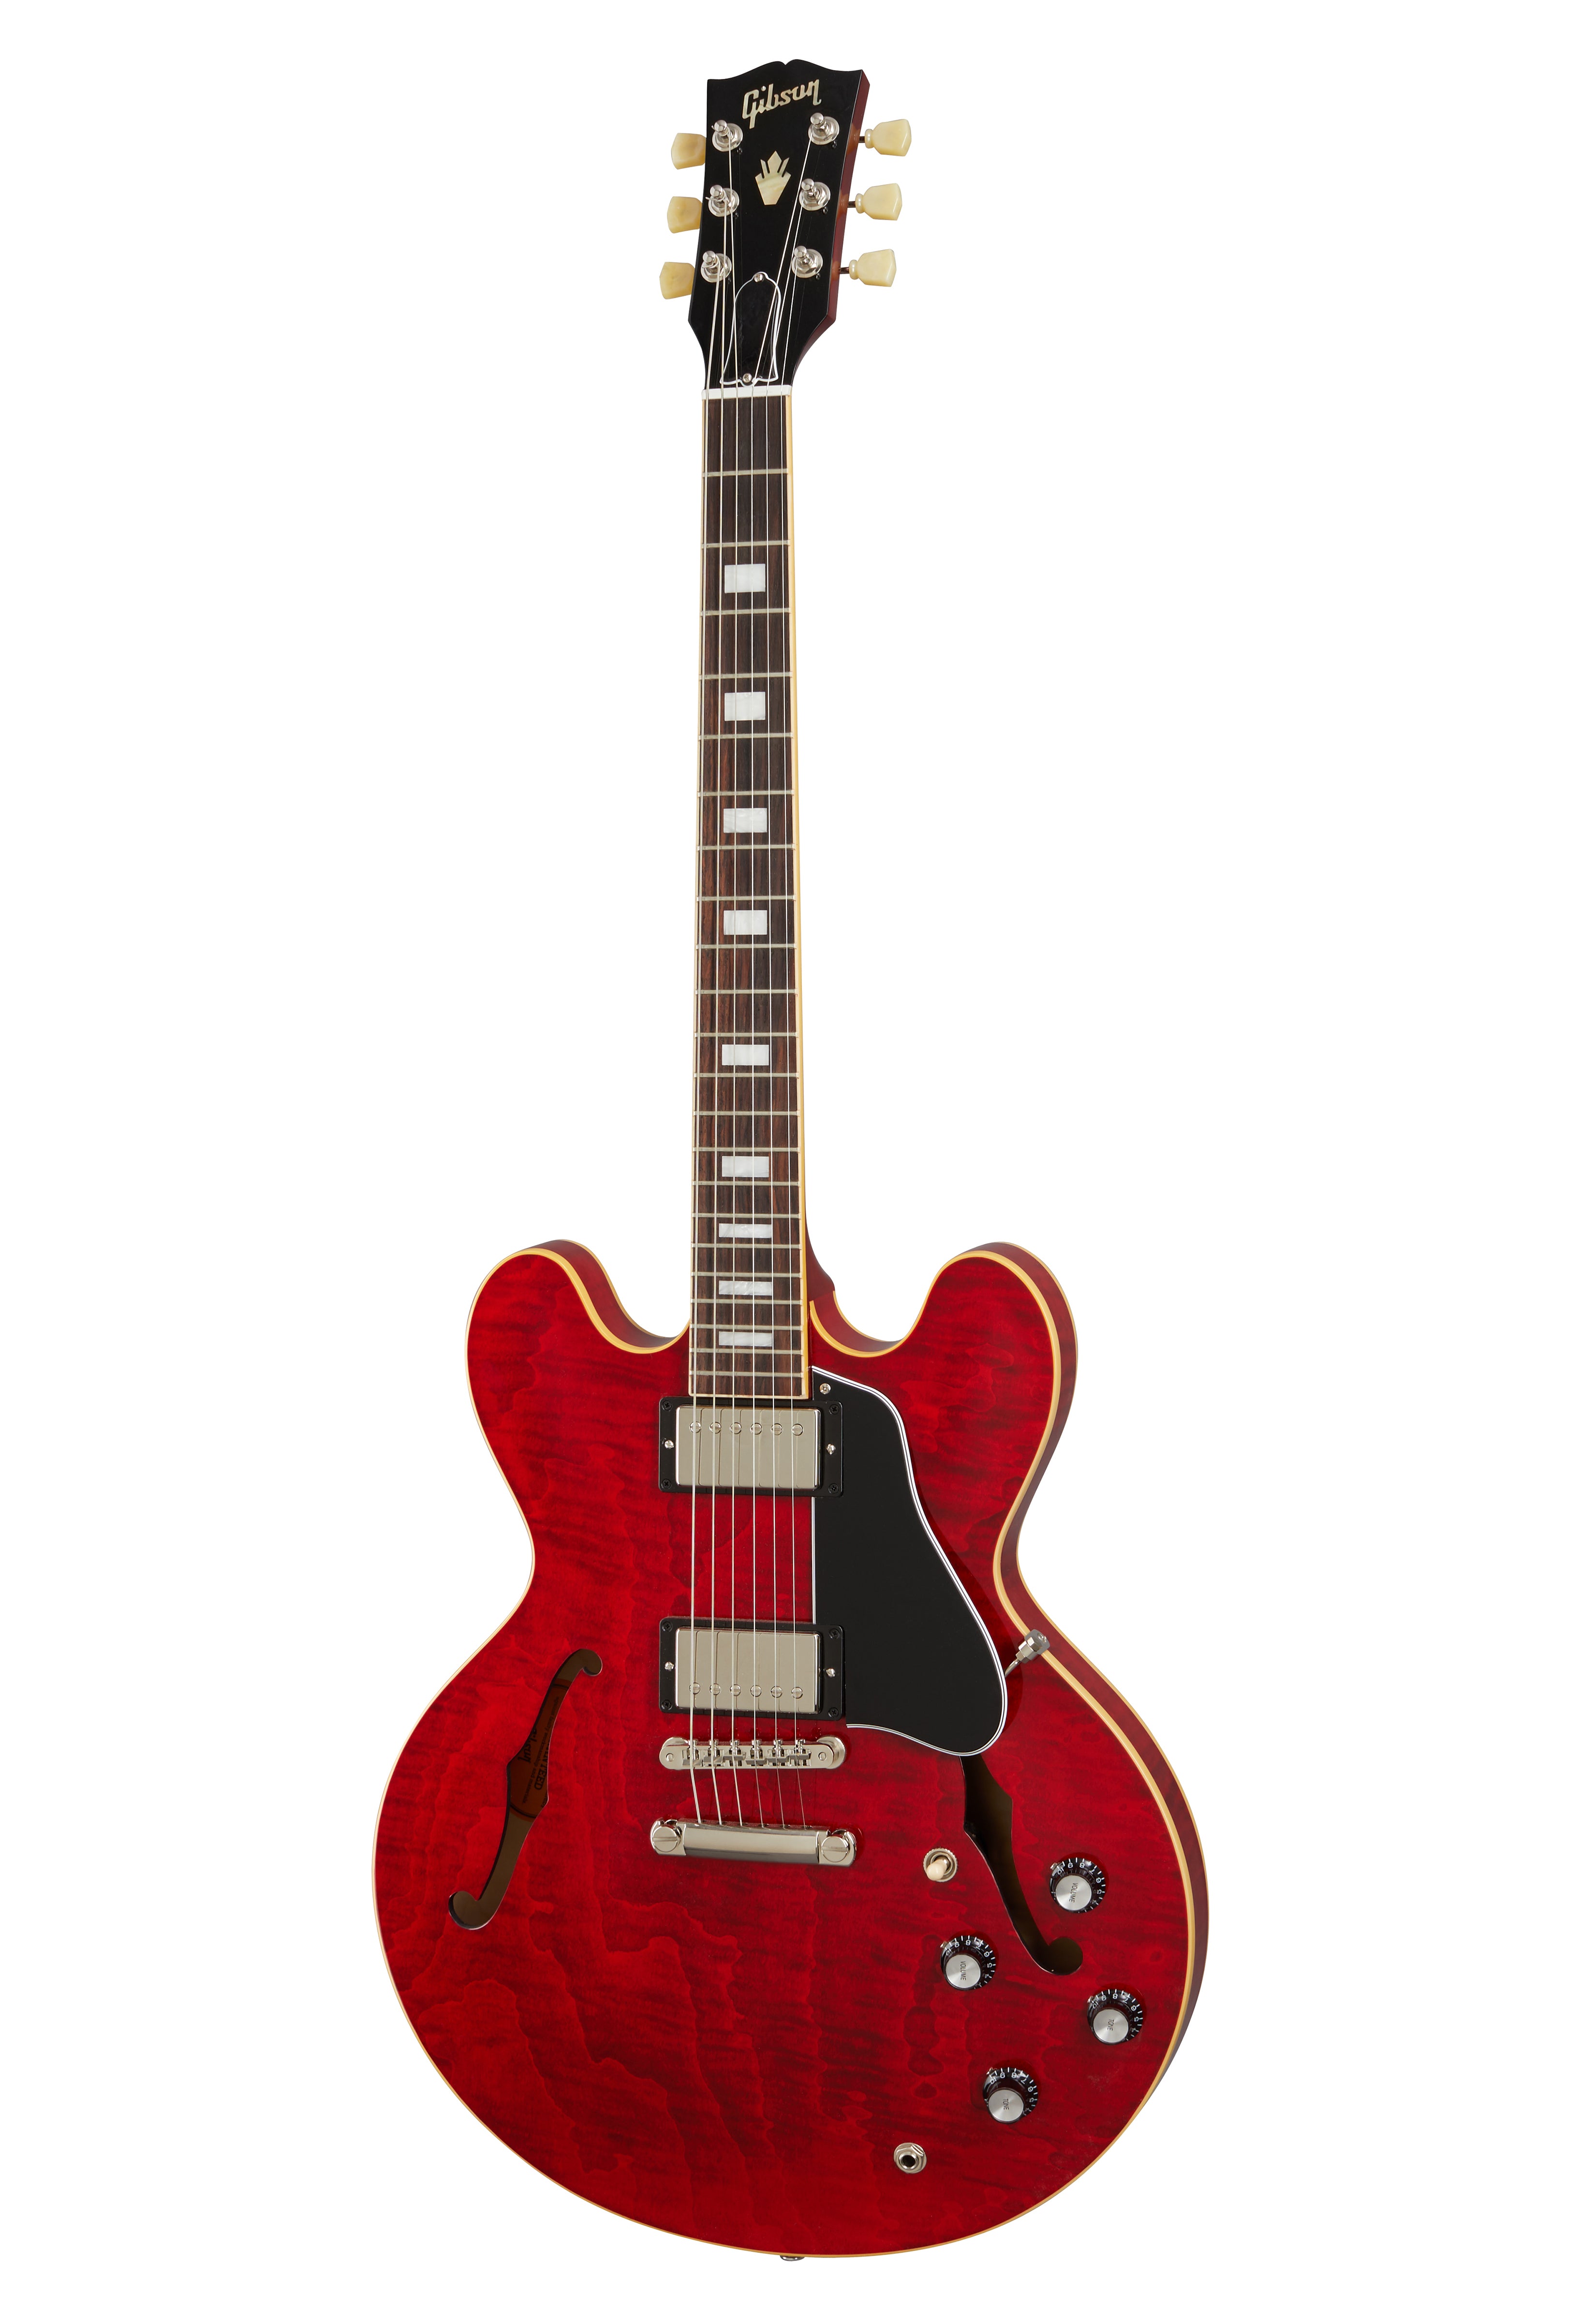 Gibson ES-335 Figured Electric Guitar, 60s Cherry